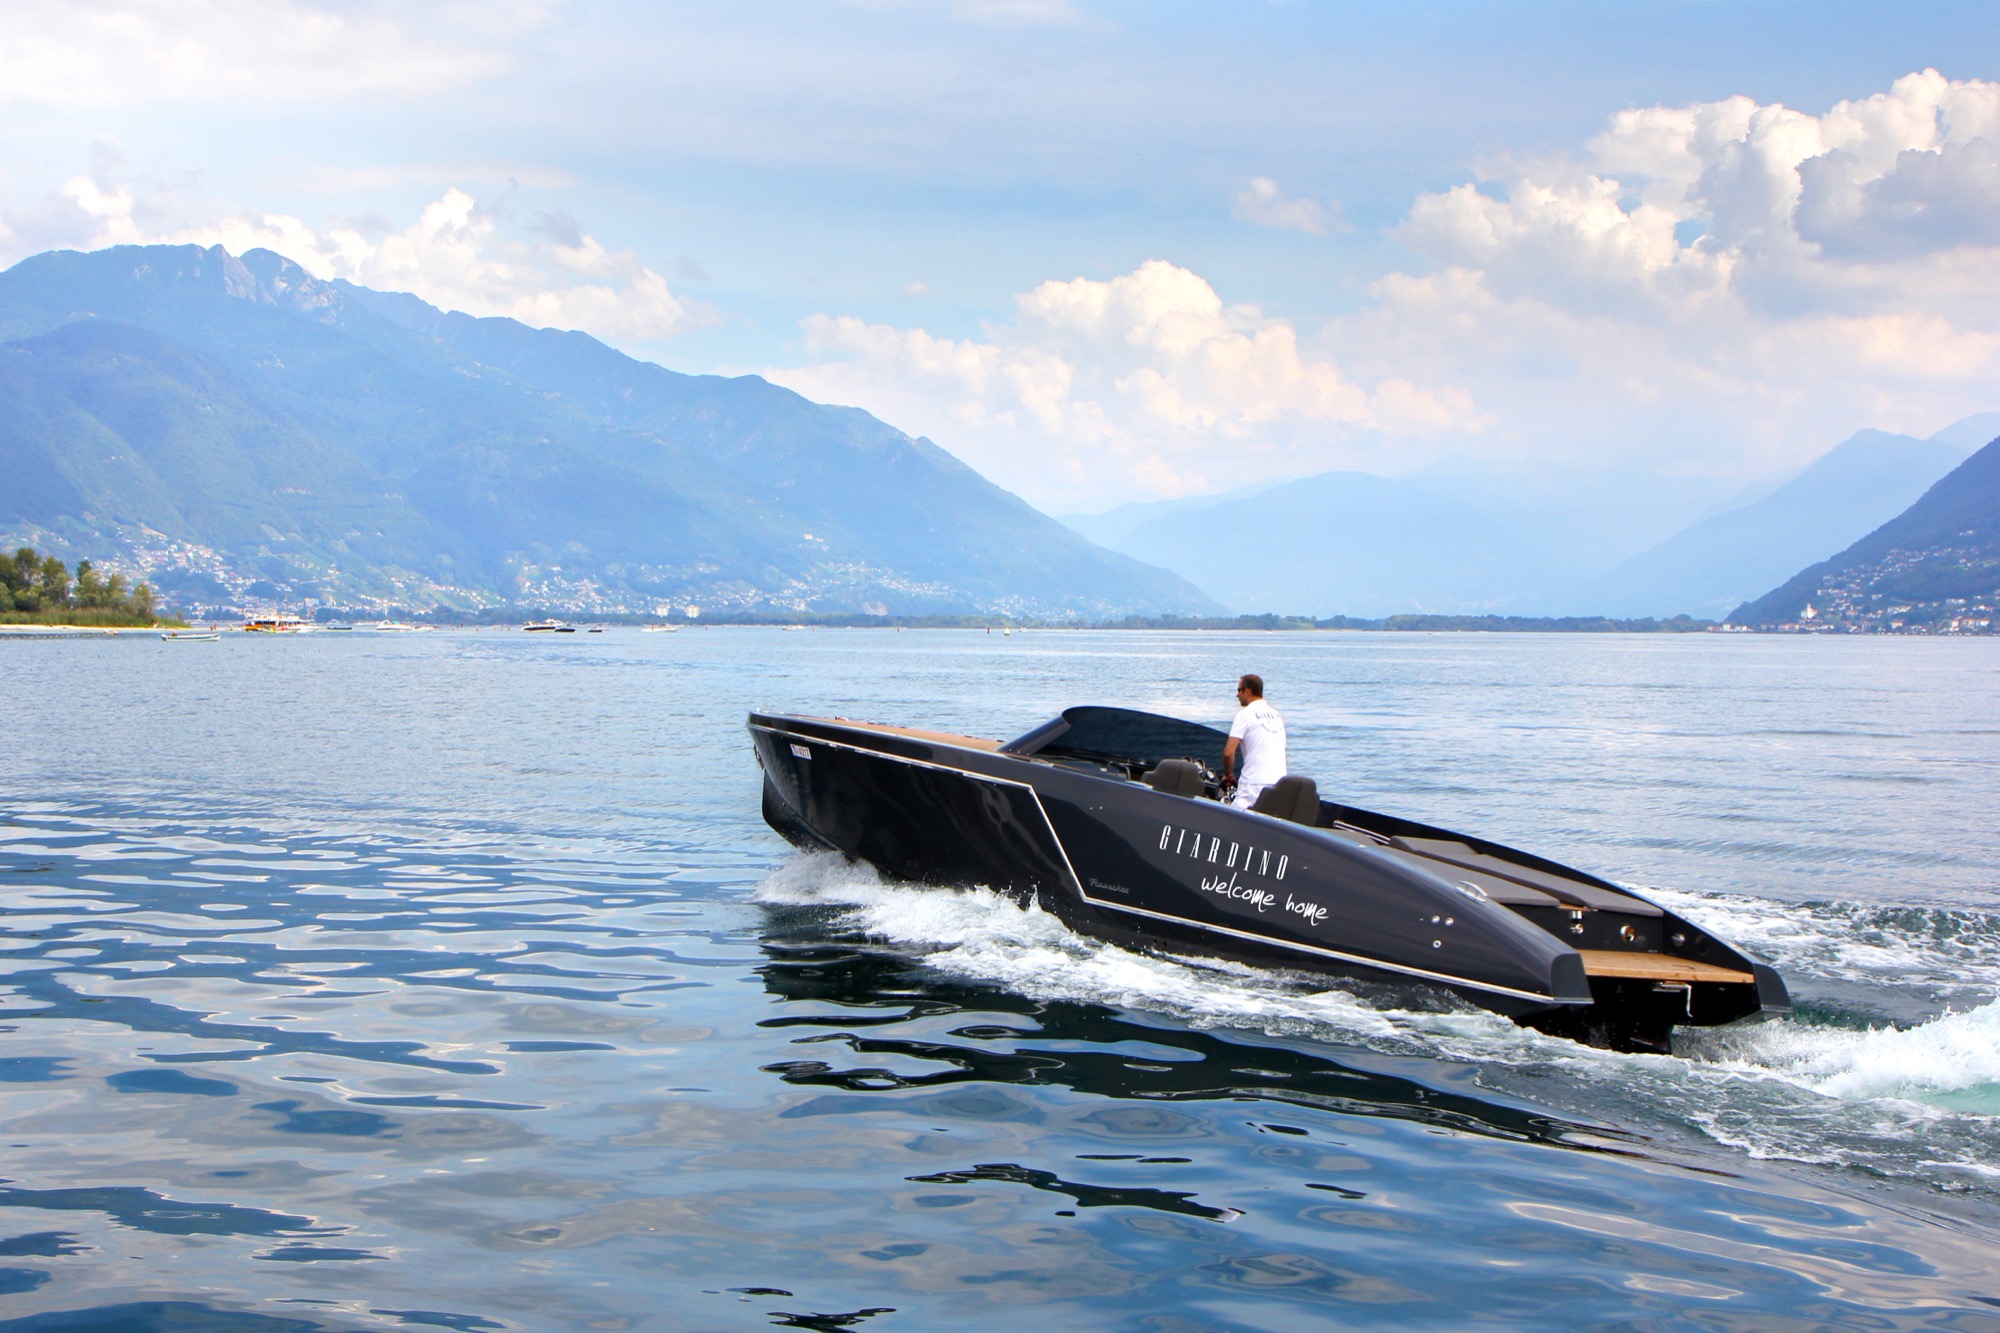 Excursion with the Frauscher motor yacht